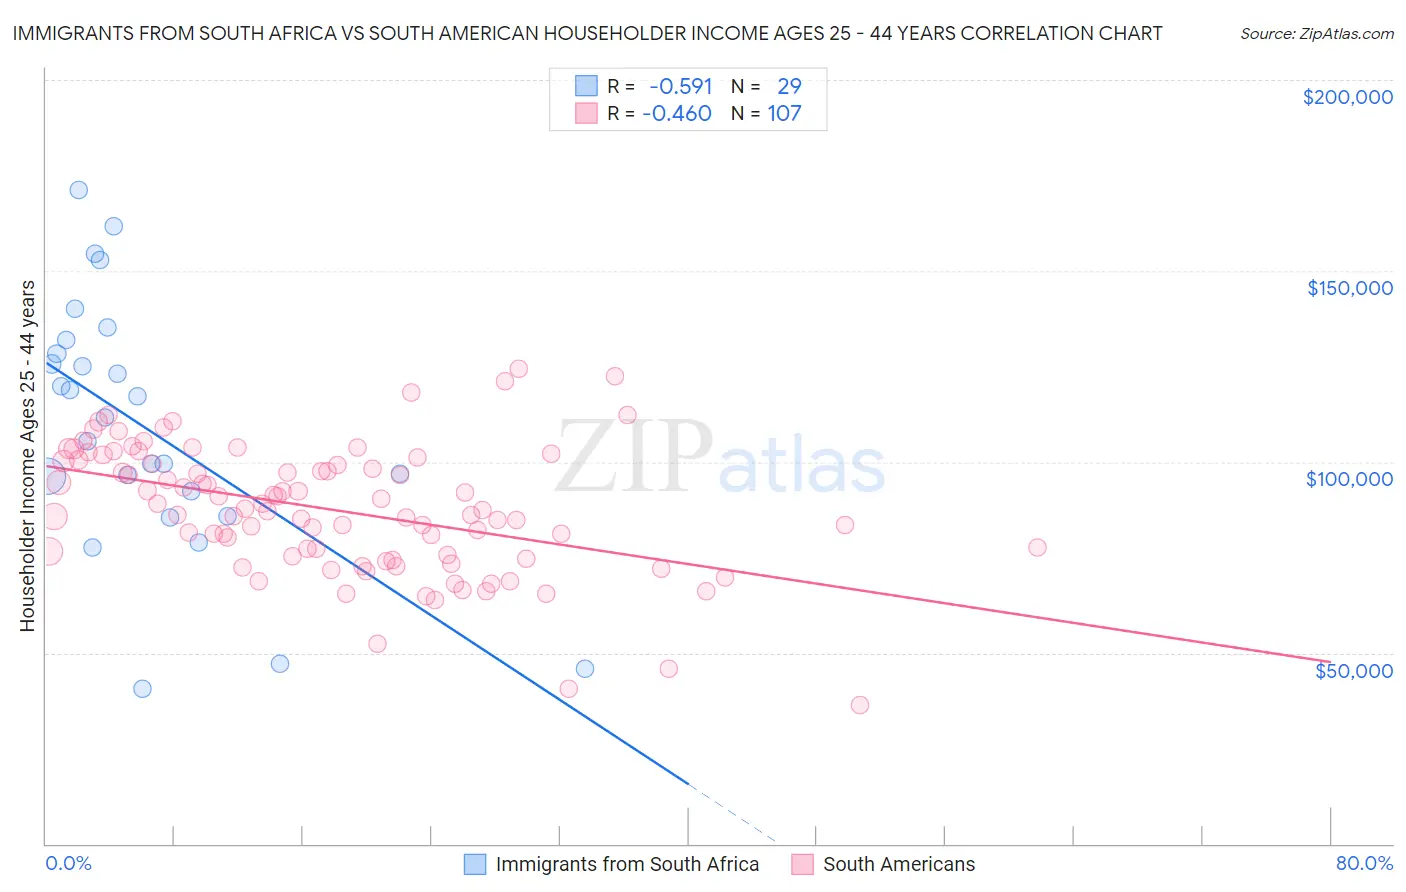 Immigrants from South Africa vs South American Householder Income Ages 25 - 44 years